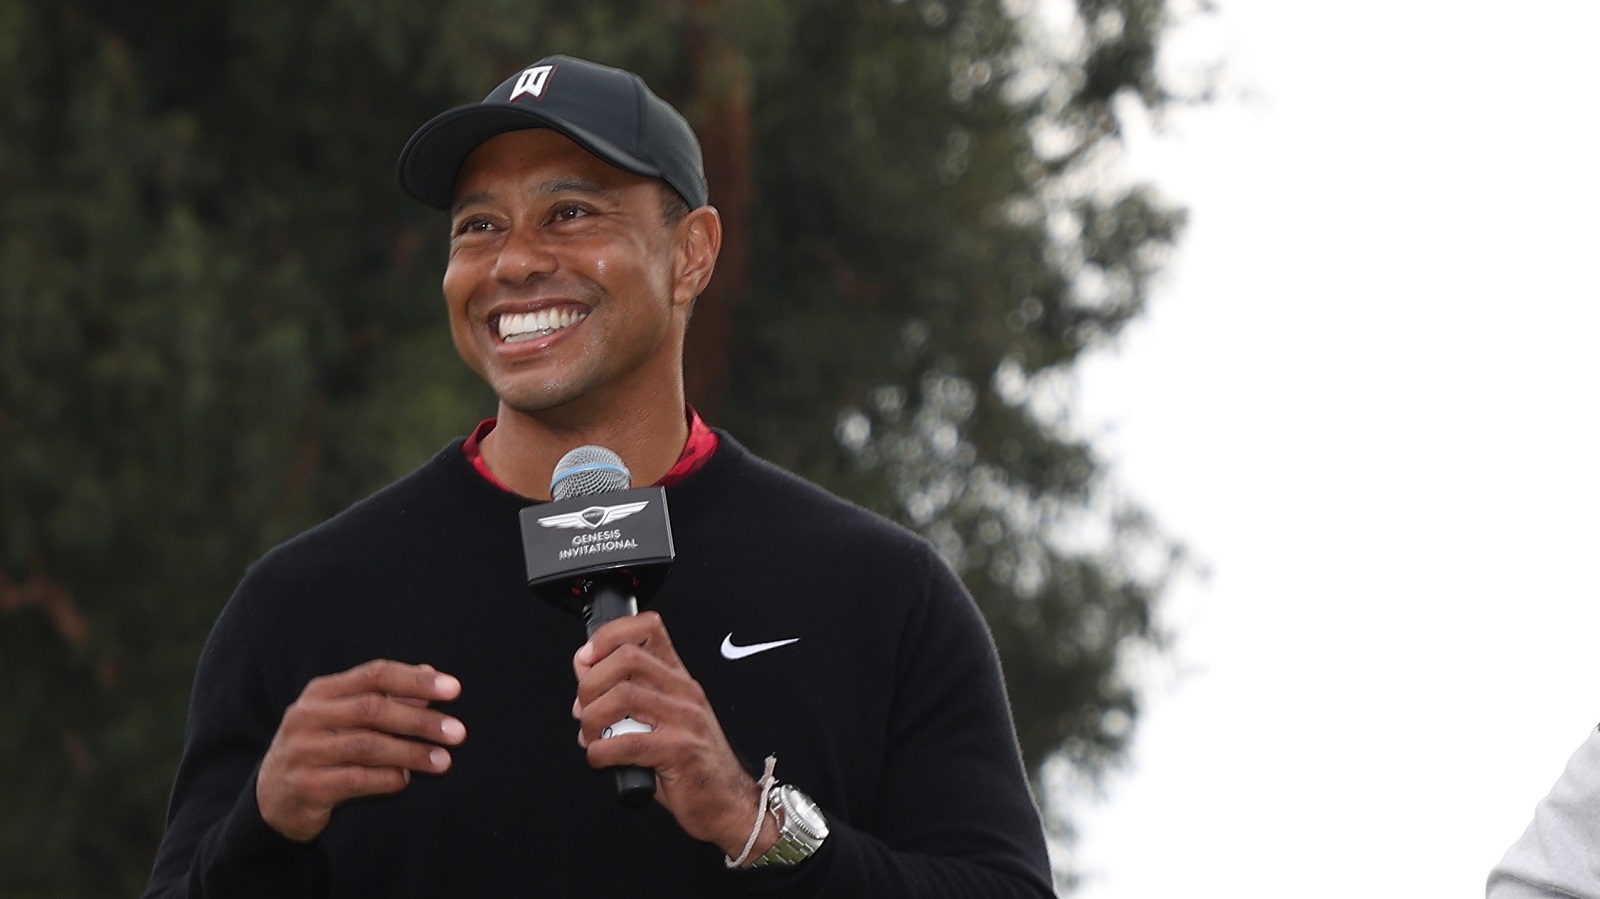 Tiger Woods, tournament host, speaks during the trophy ceremony for The Genesis Invitational at Riviera Country Club on Feb. 20, 2022, in Pacific Palisades, California.